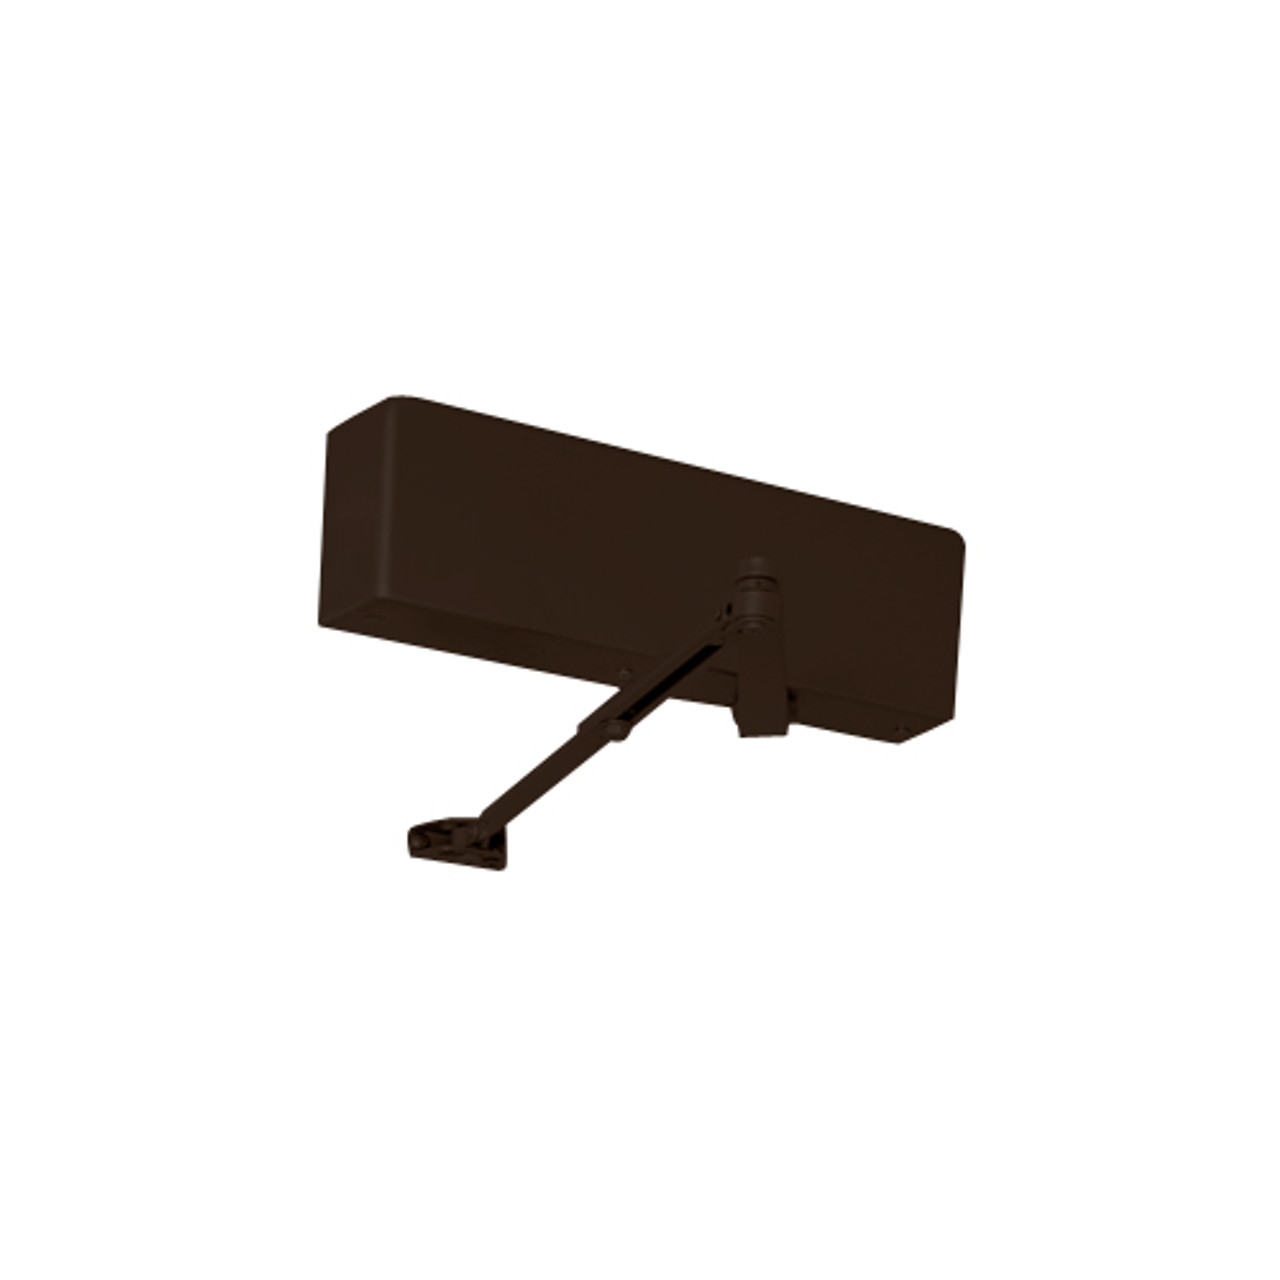 JL7500HDA-690 Norton 7500 Series Hold Open Institutional Door Closer with Top Jamb Only Reveals 2-3/4 to 6-3/4 inch to 180 Degree in Statuary Bronze Finish